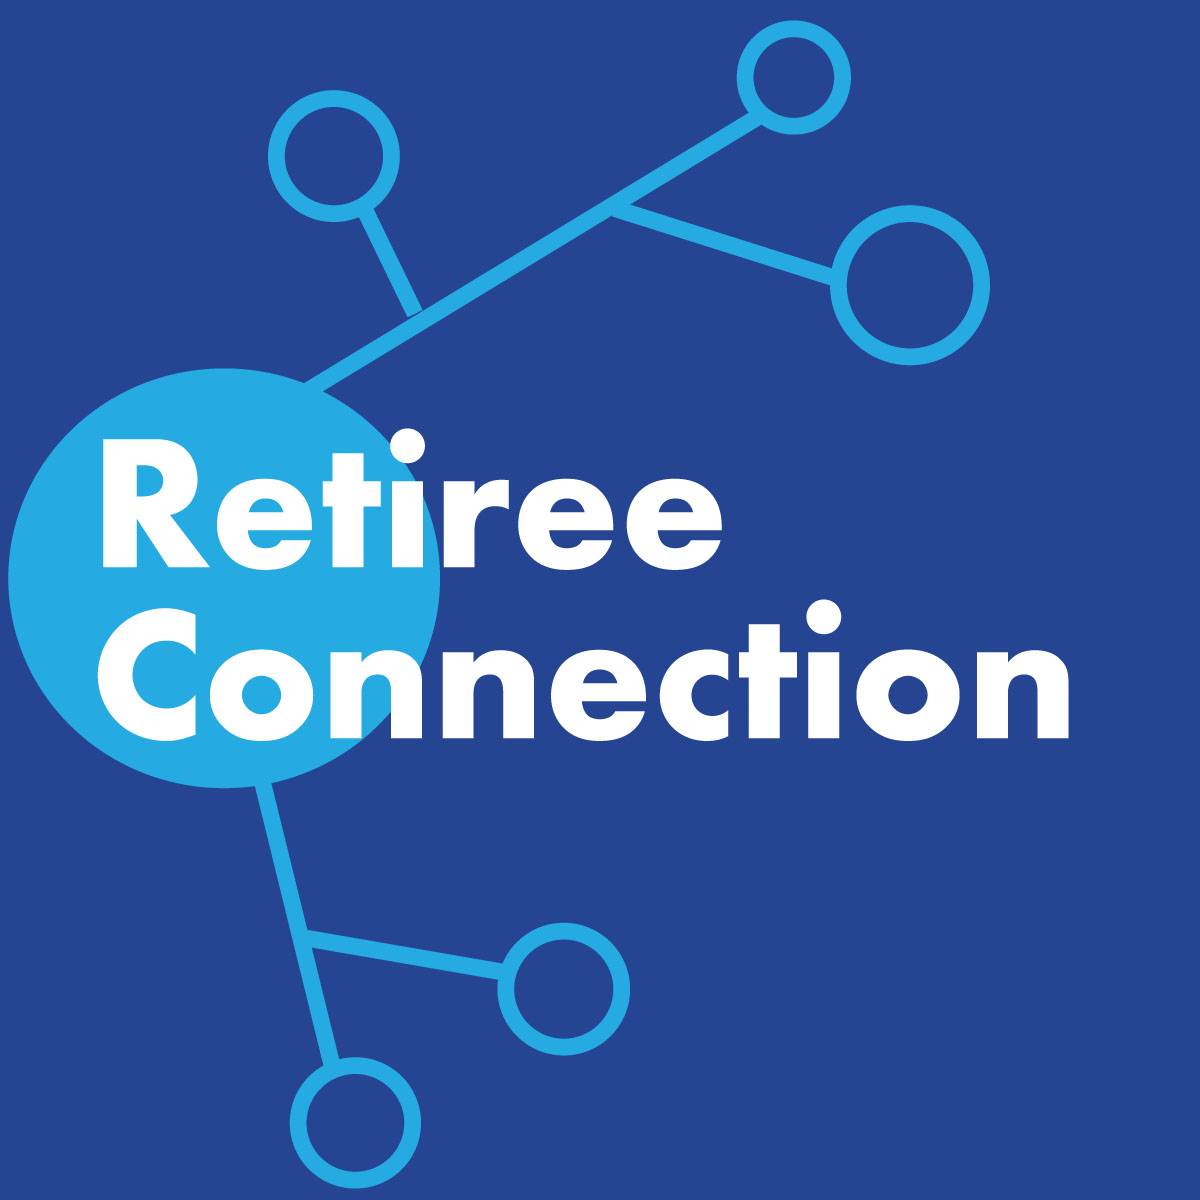 Text Retiree Connection